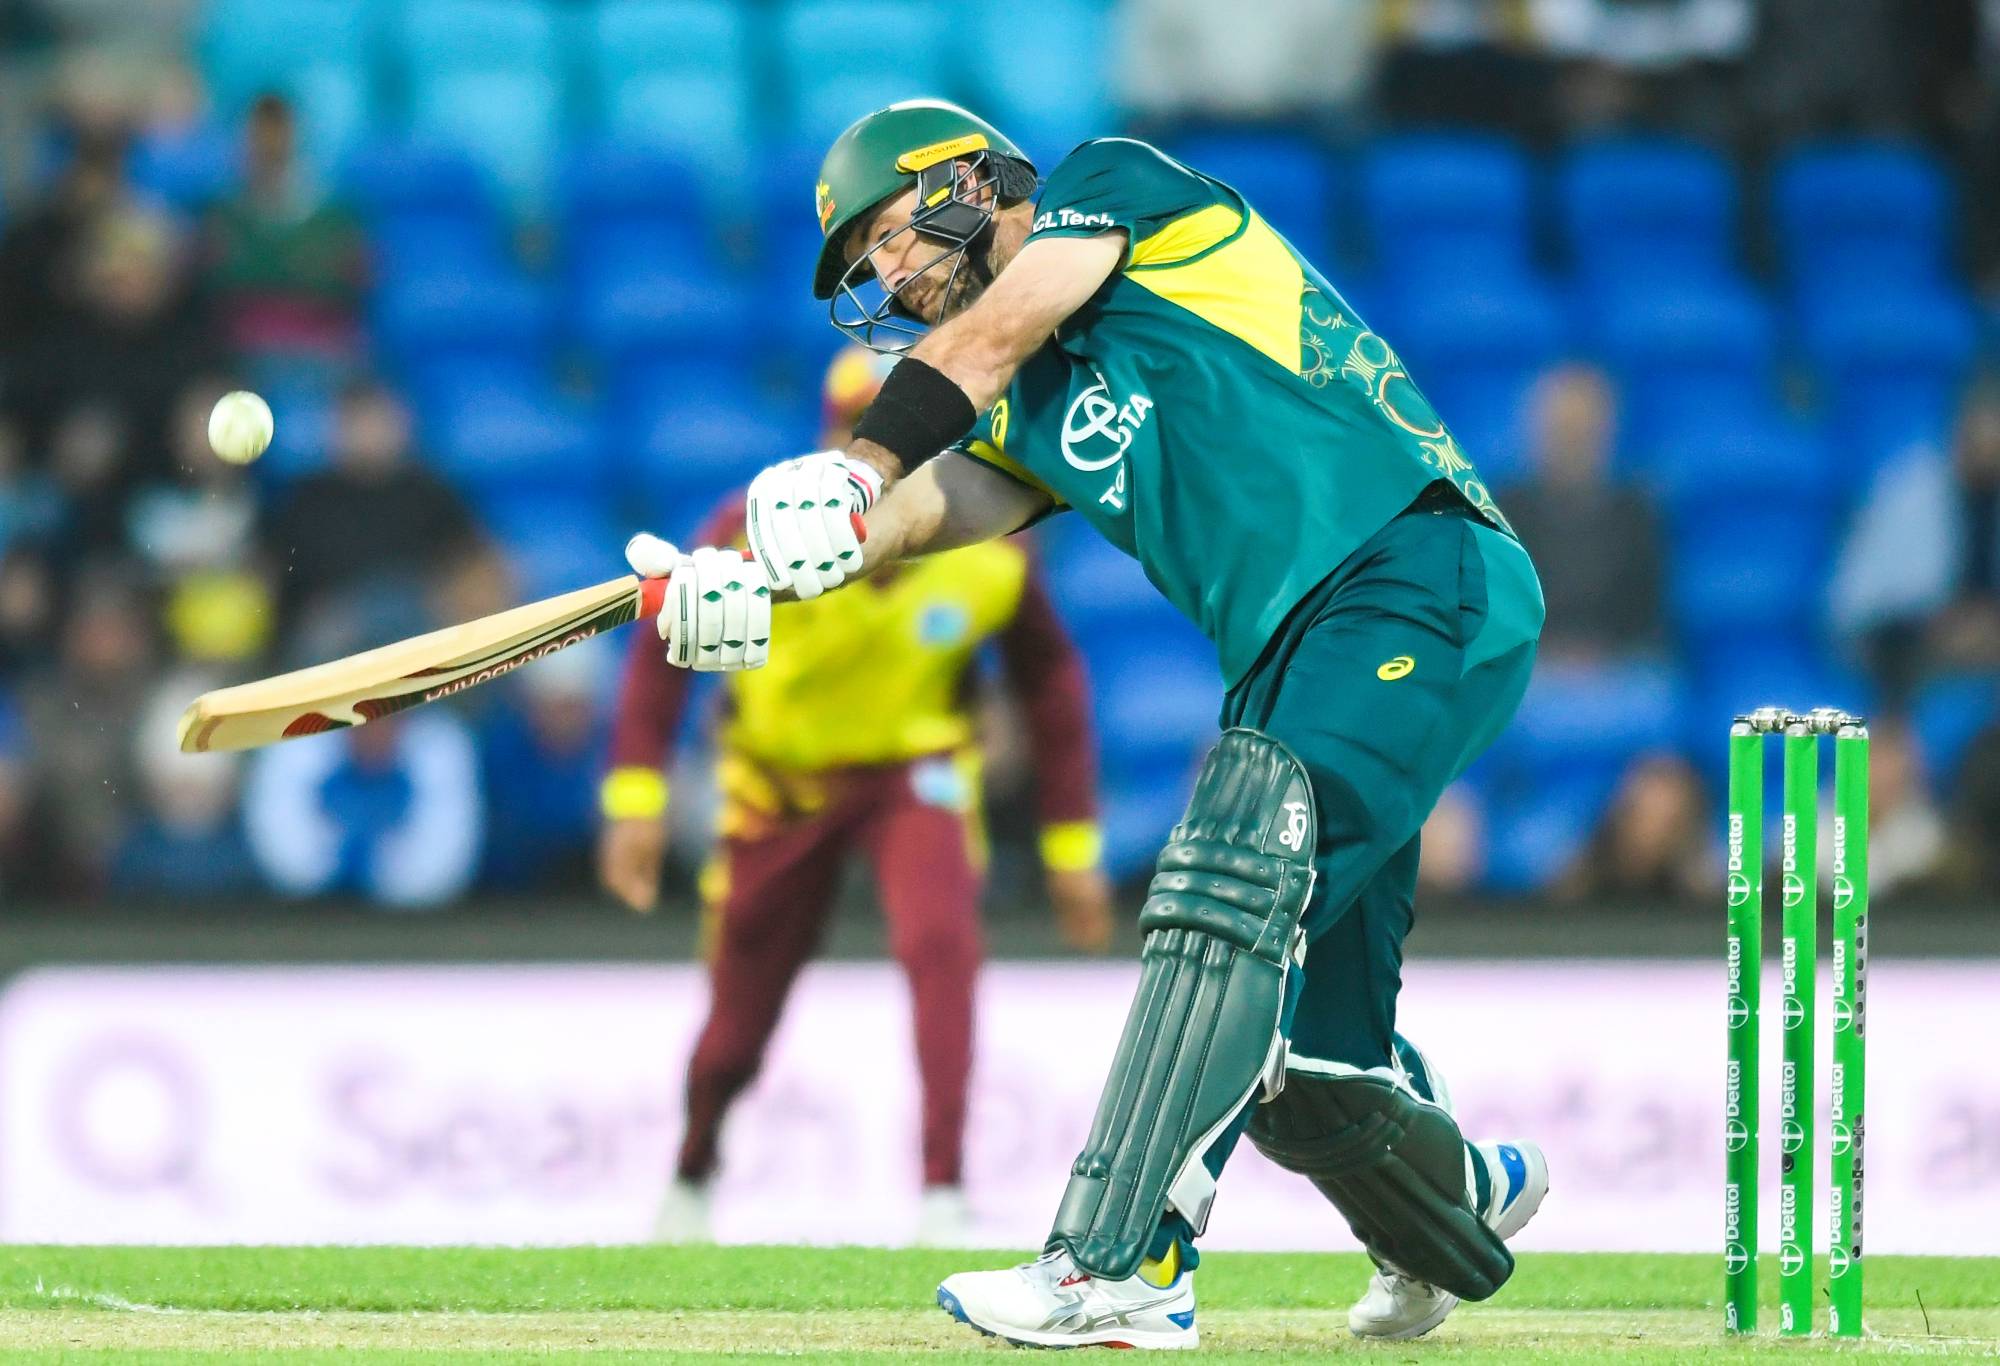 HOBART, AUSTRALIA - FEBRUARY 09: Glenn Maxwell of Australia plays a pull shot during game one of the Men's T20 International series between Australia and West Indies at Blundstone Arena on February 09, 2024 in Hobart, Australia. (Photo by Simon Sturzaker/Getty Images)